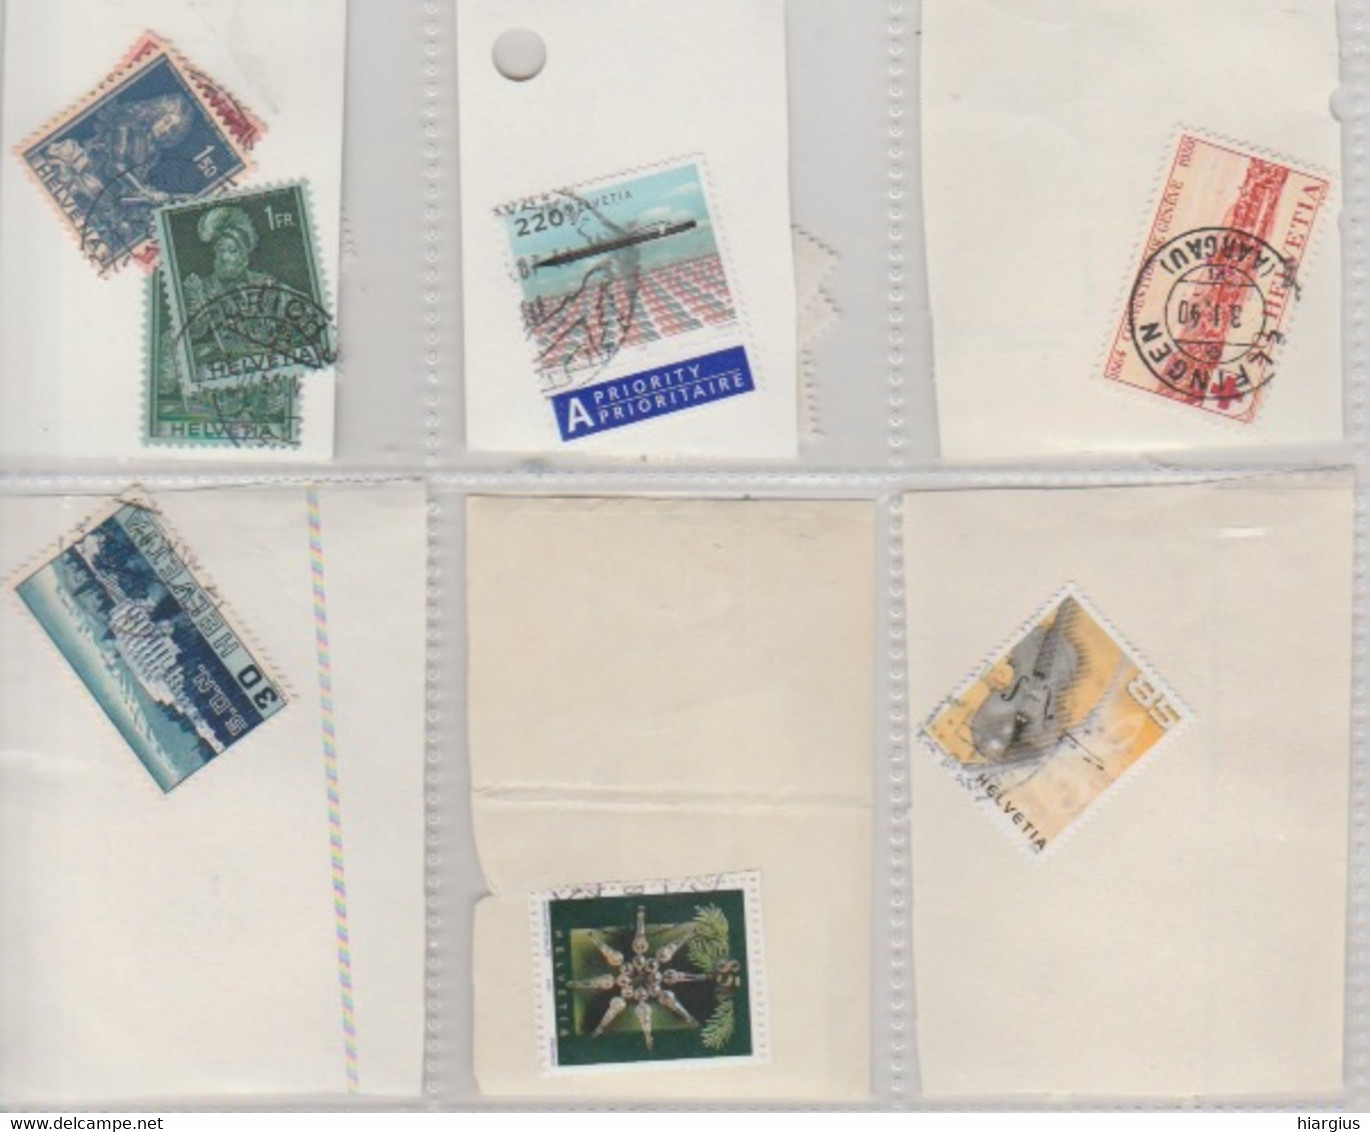 SWITZERLAND -Lot of 1323 used stamps.